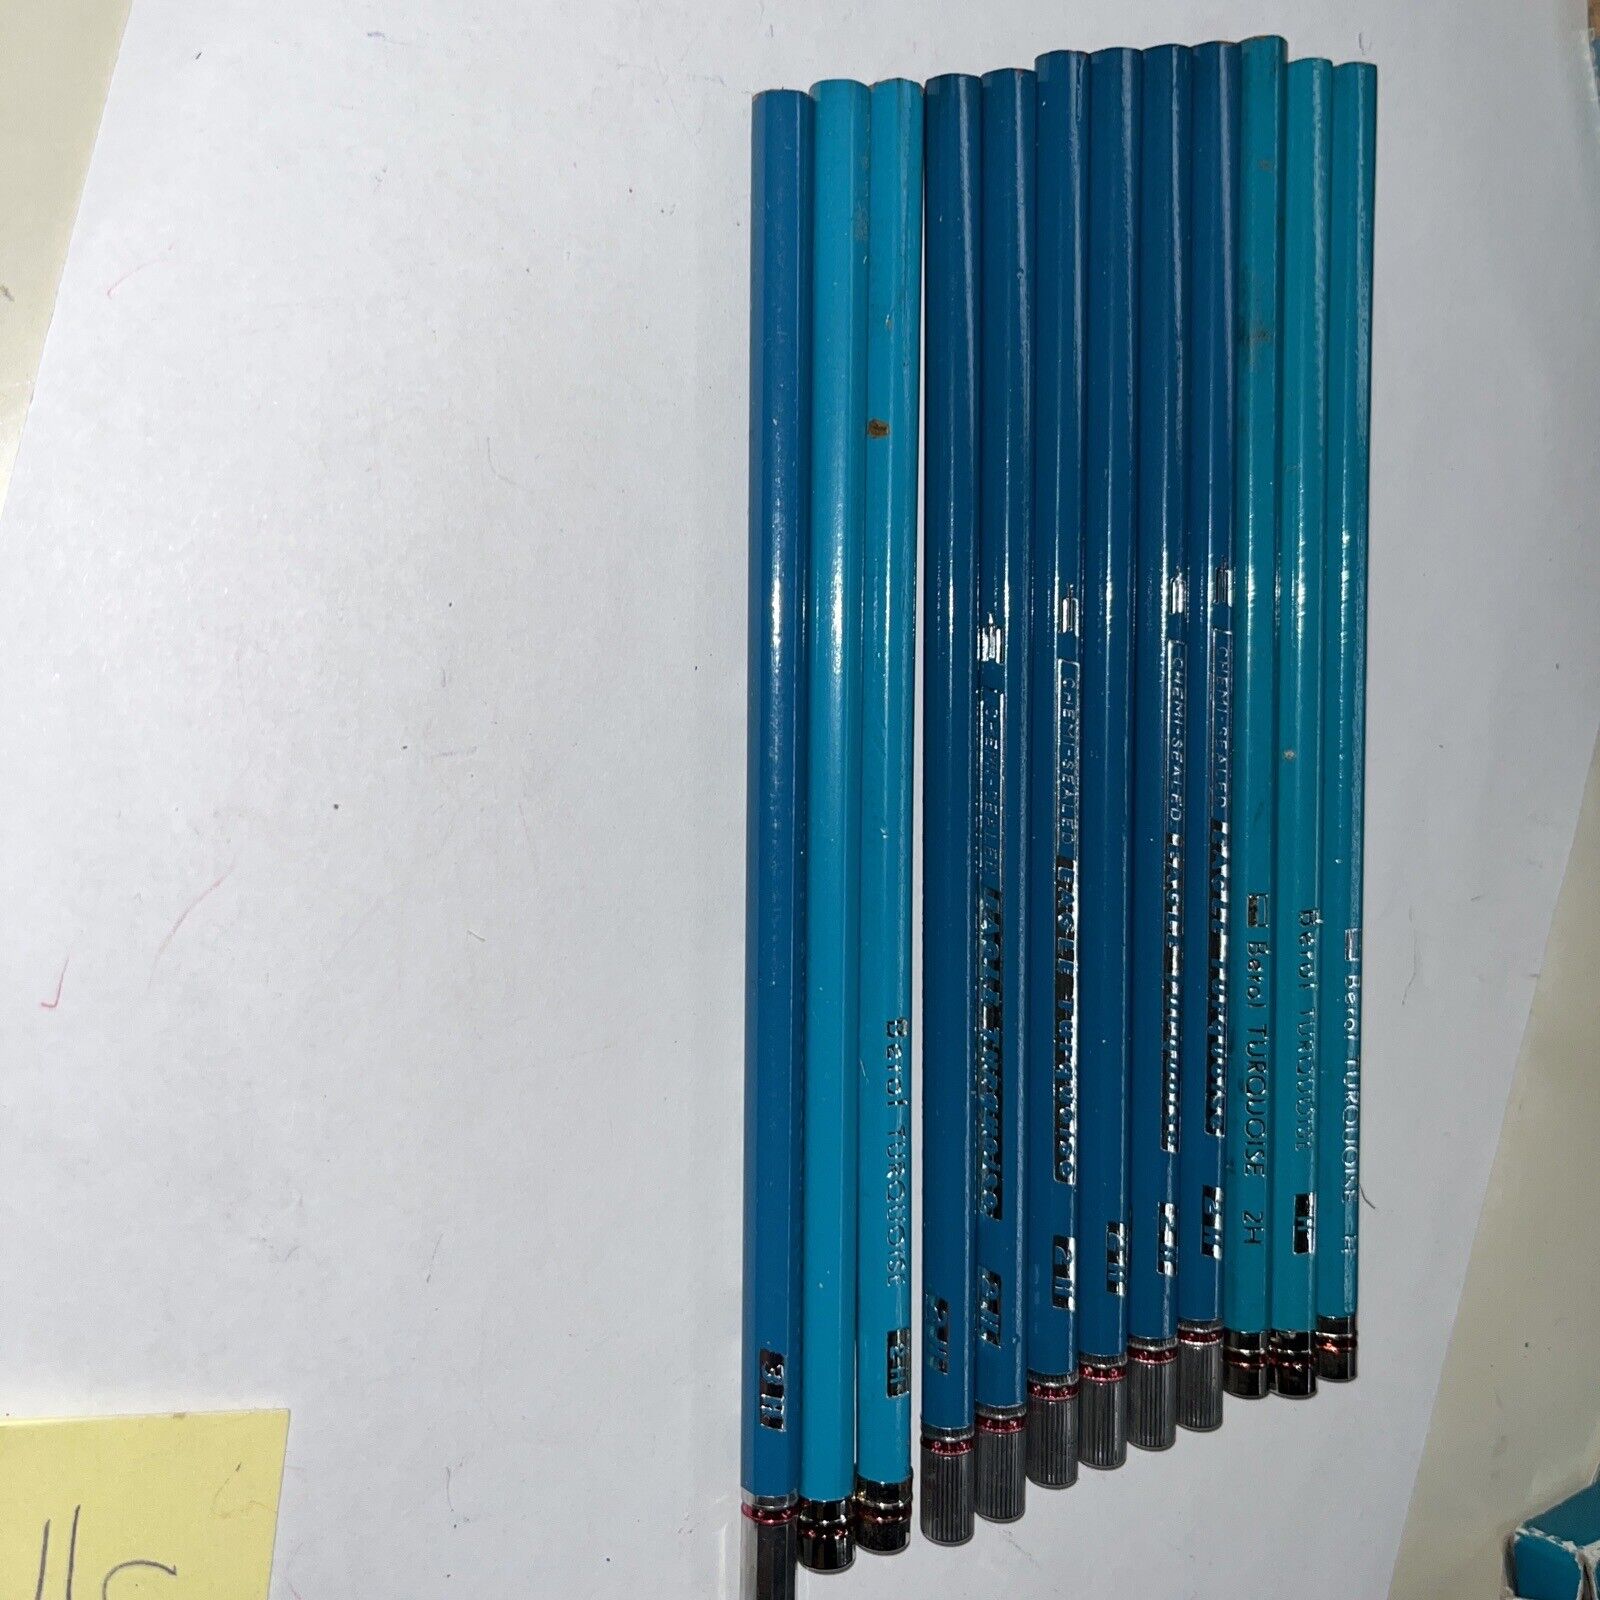 Beautiful New 12 Assorted BEROL TURQUOISE Great New Pencils Made In The USA